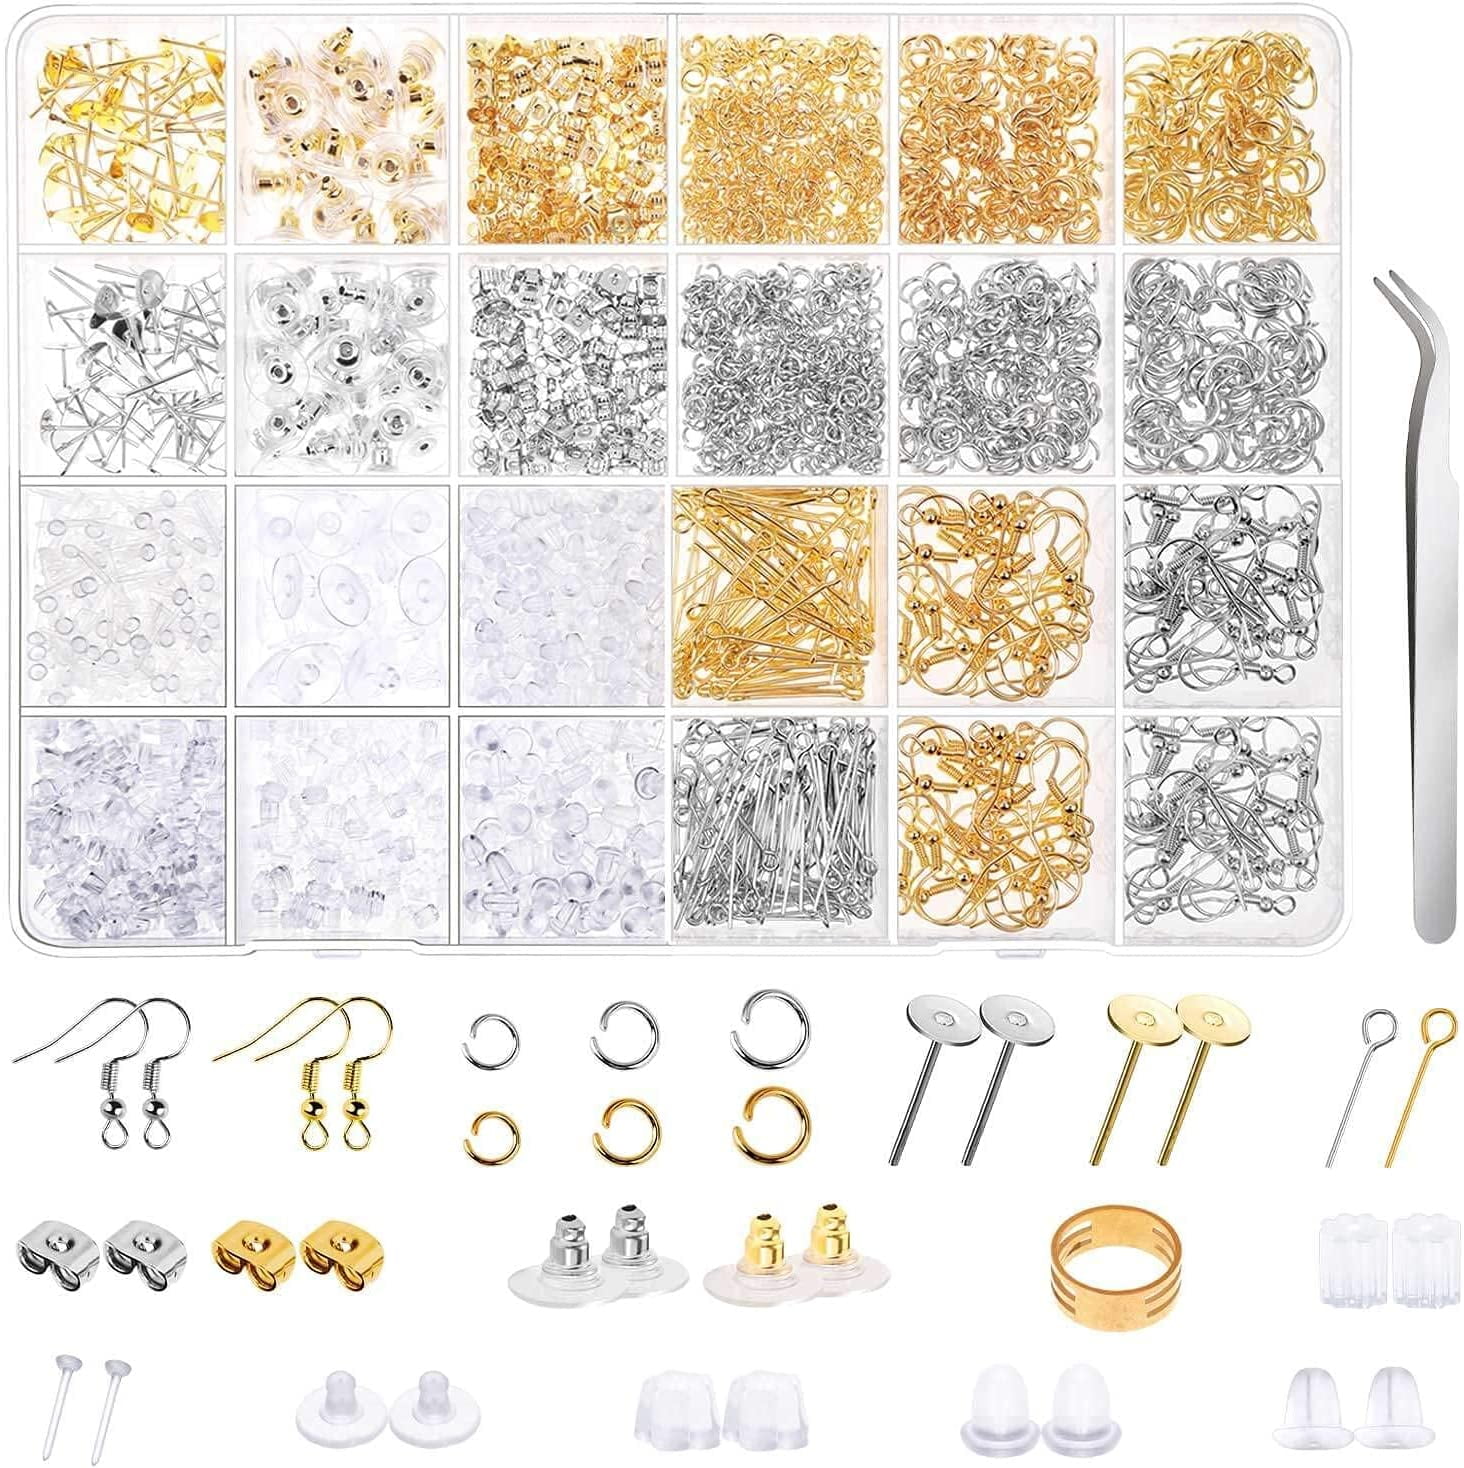 MELODYGOODS1 100pcs Earring Backs DIY Jewelry Findings Round Components  Stud Back Stoppers